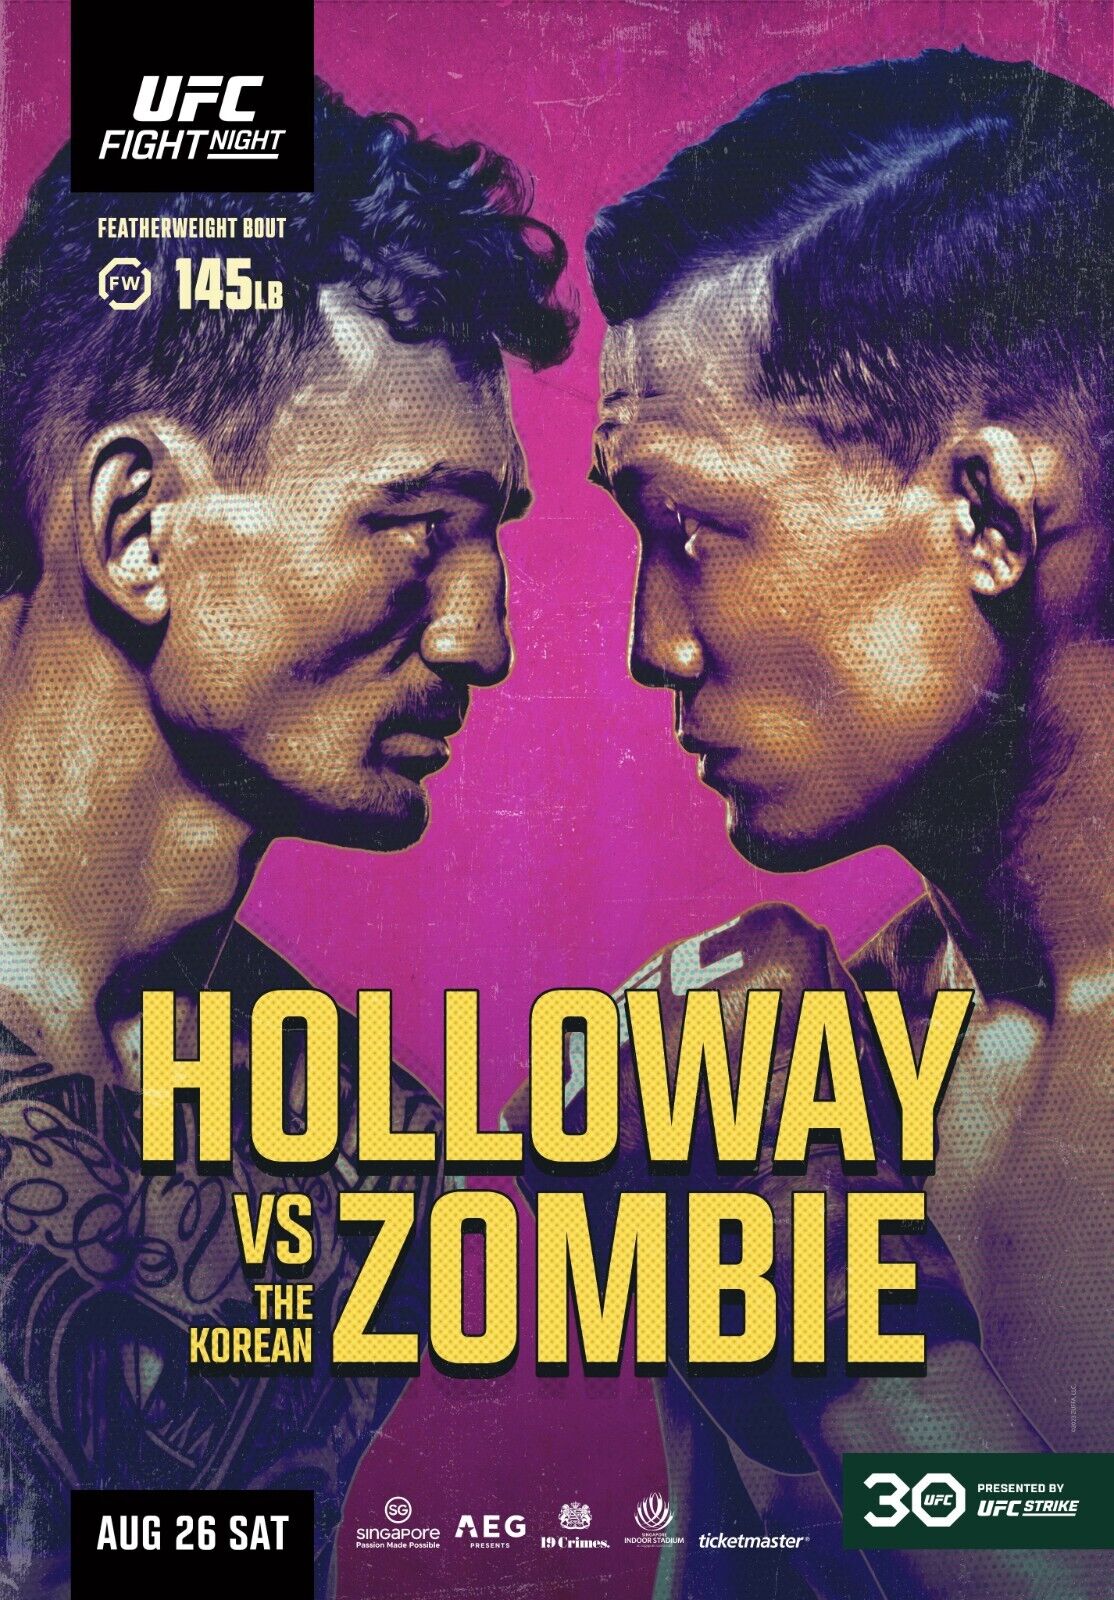 UFC Fight Night Singapore Poster 11x17 Inches - Max Holloway vs Korean Zombie